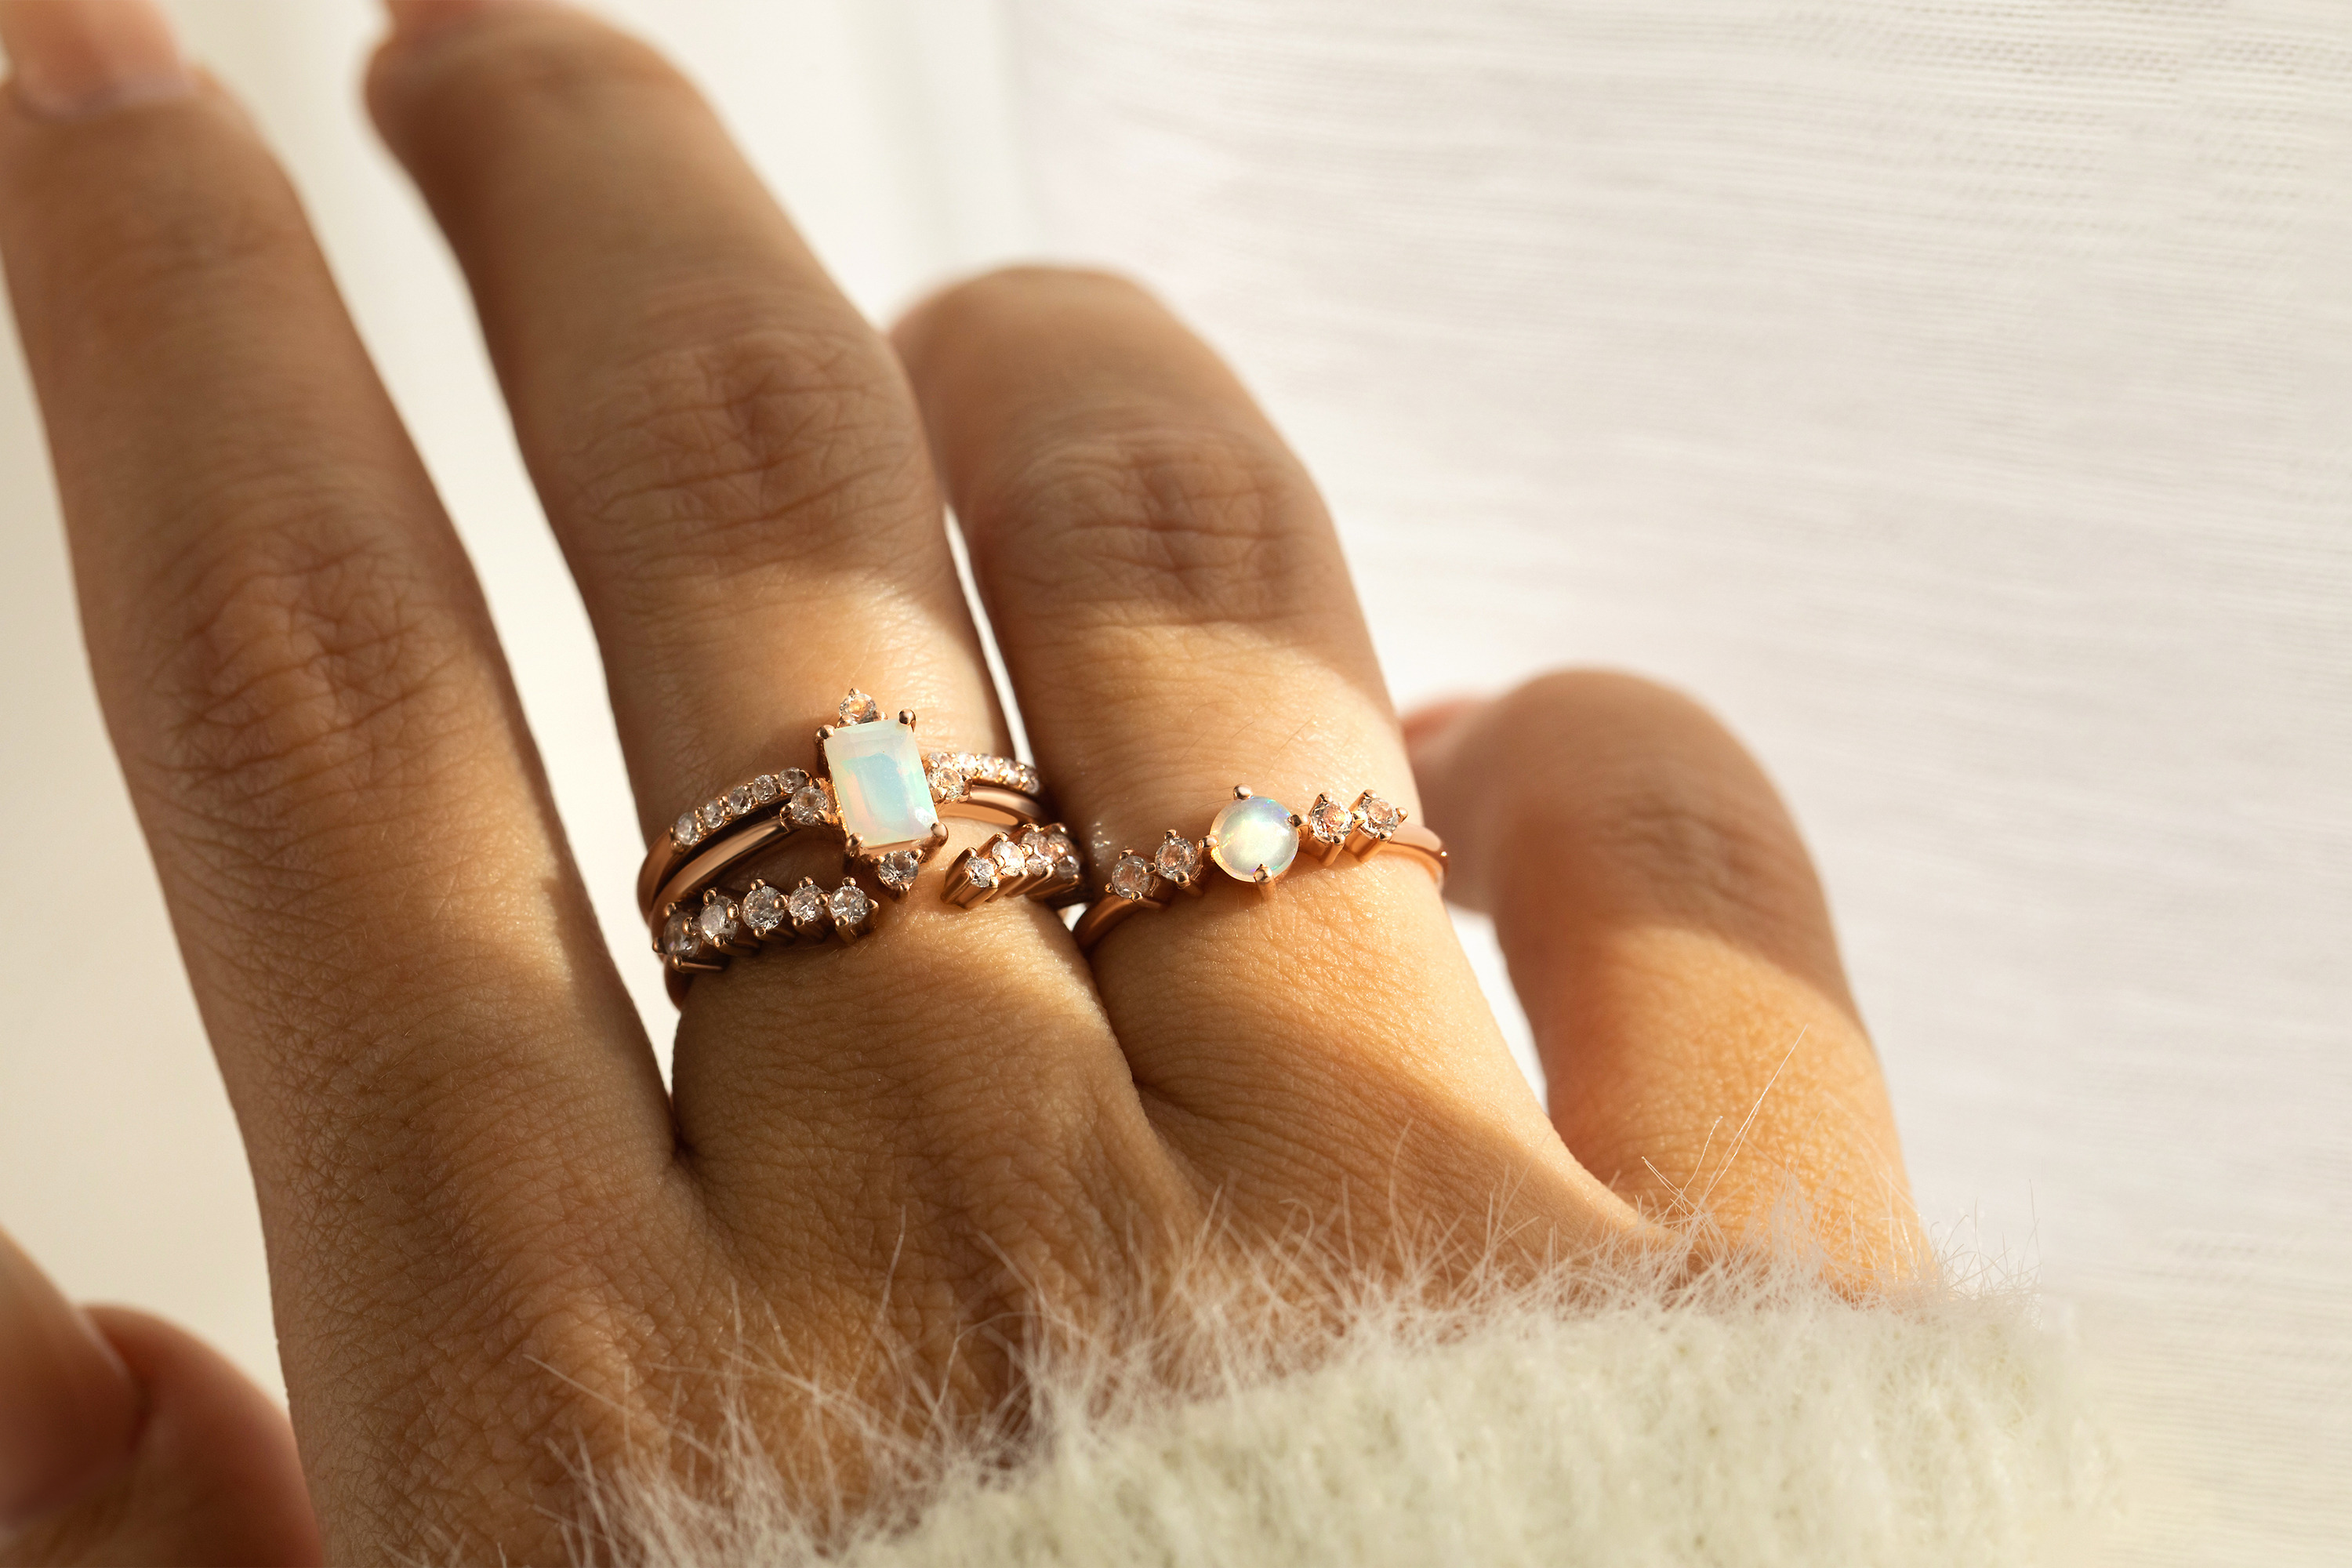 Two Opal rings in different styles and two band rings are presented on a hand.